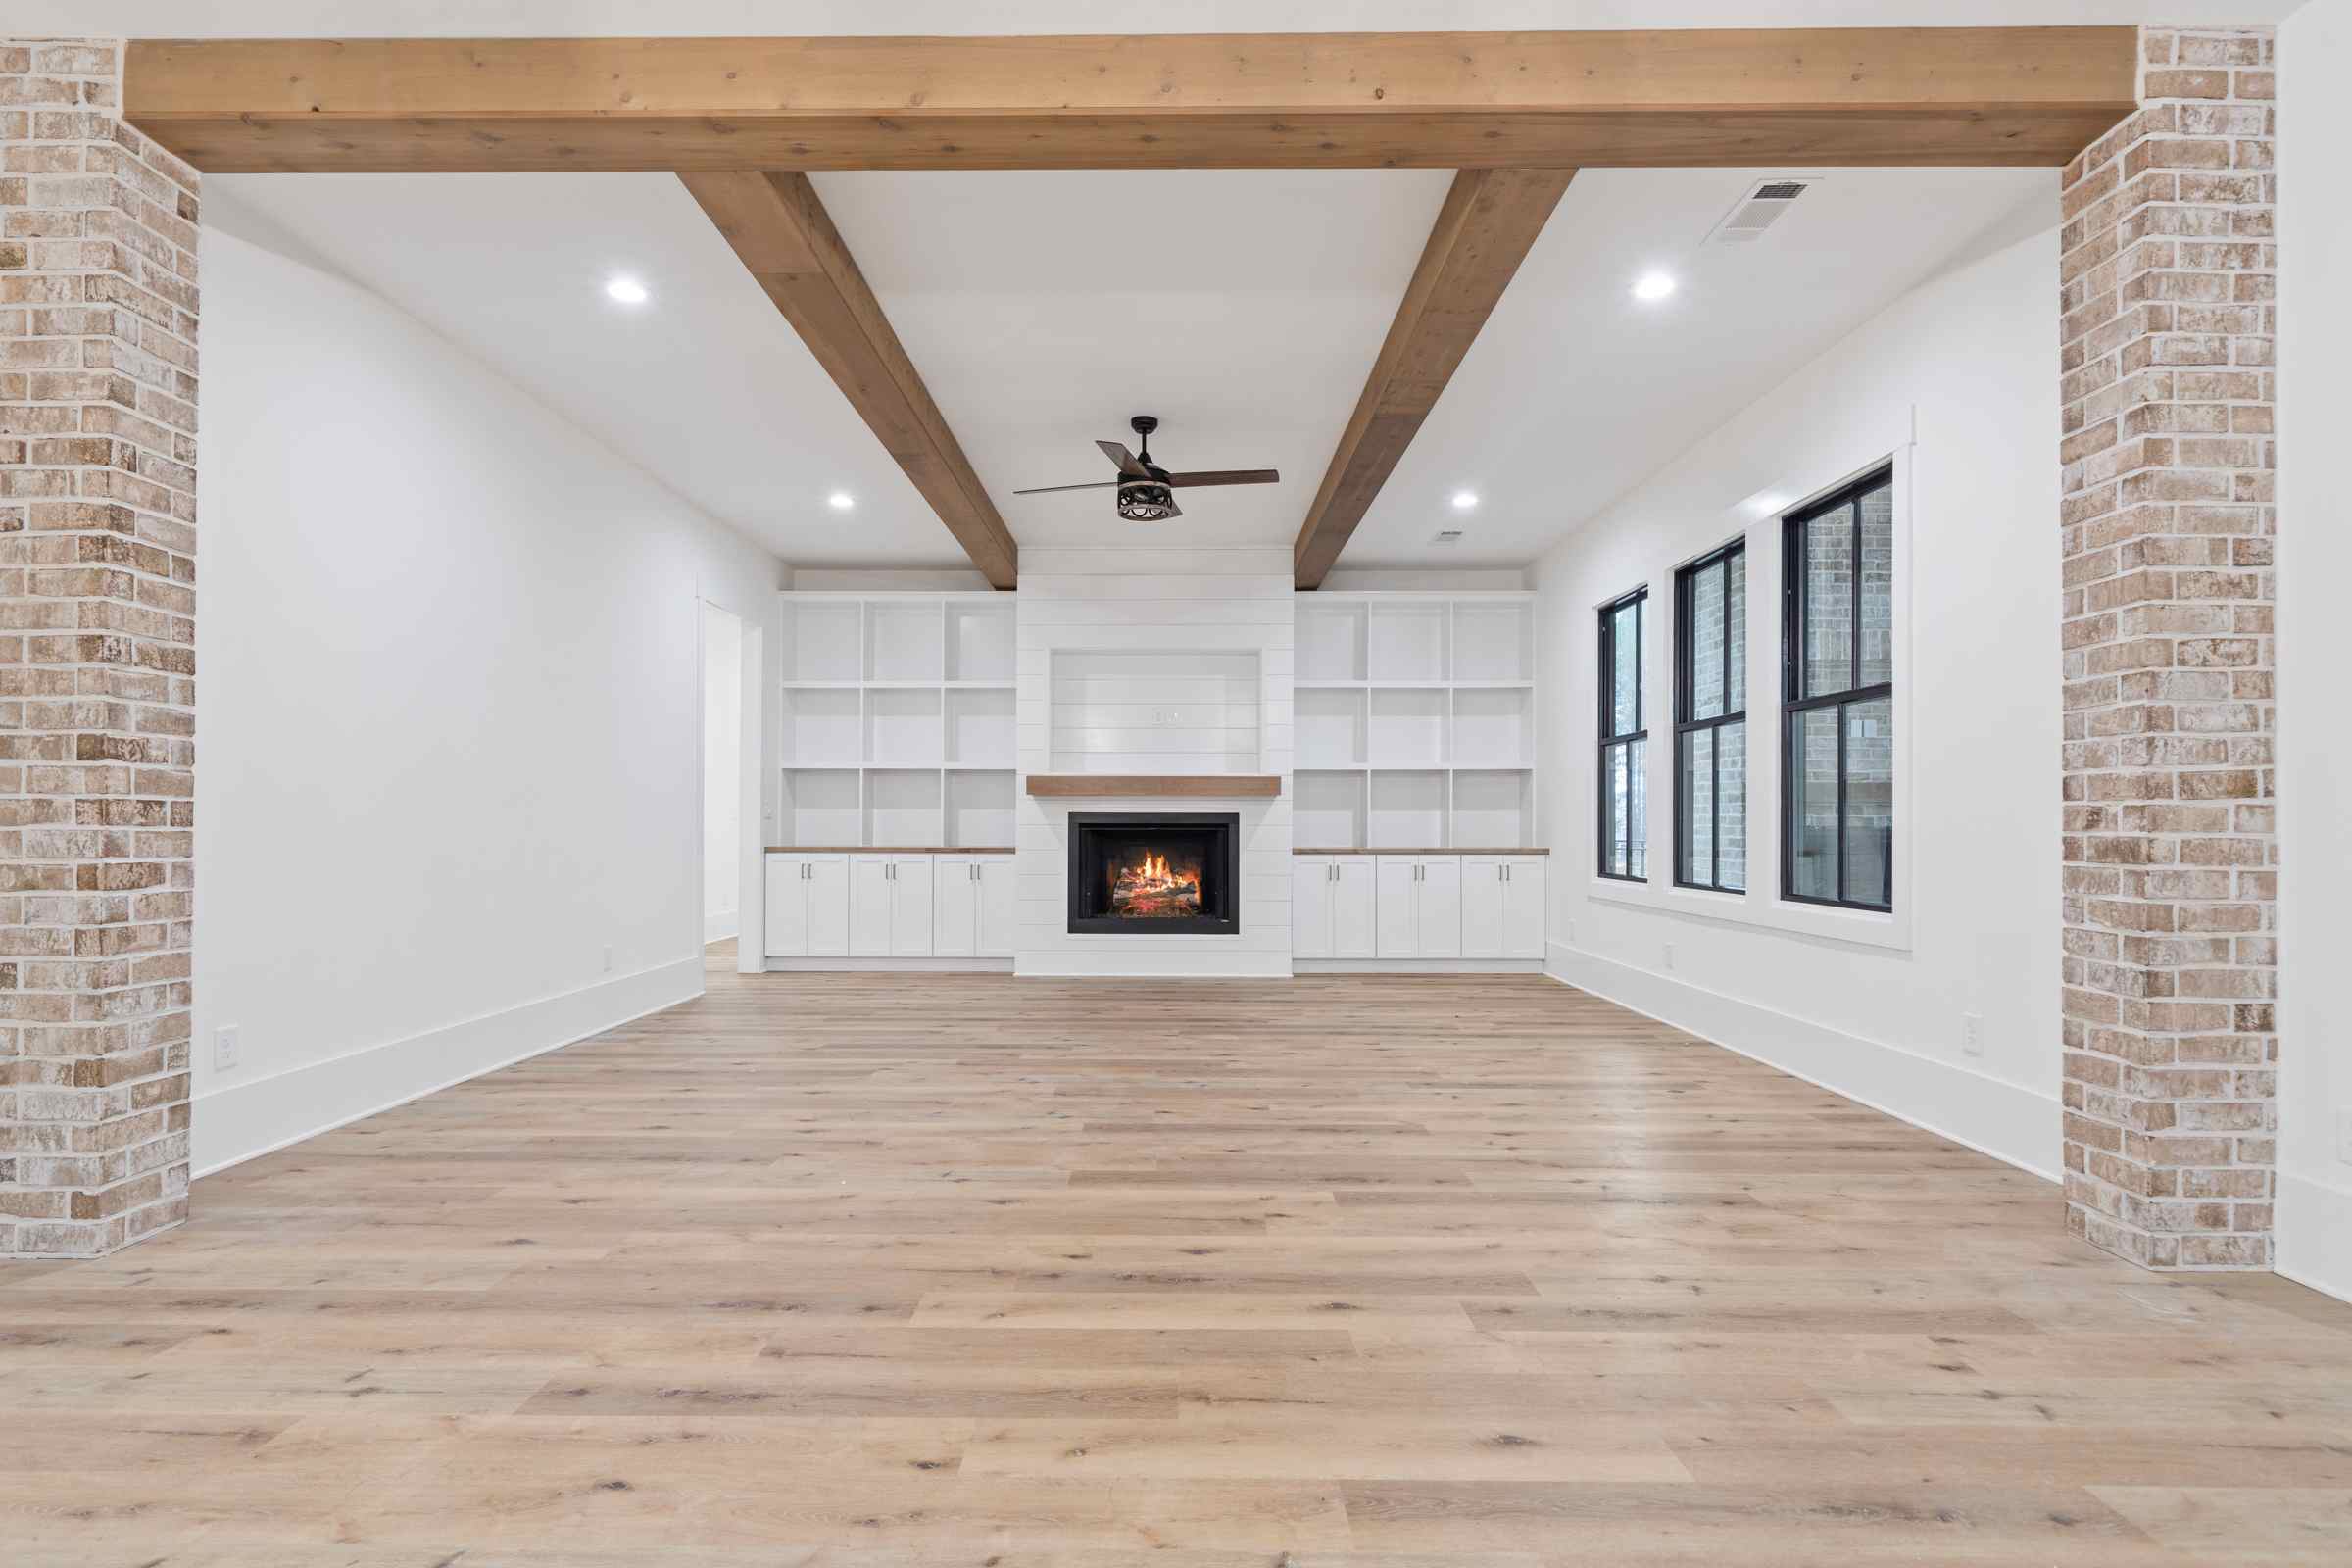 16 Paxis Indian Trail living area, built-in shelving, fireplace, exposed brick, wooden beams | Paxisgroup